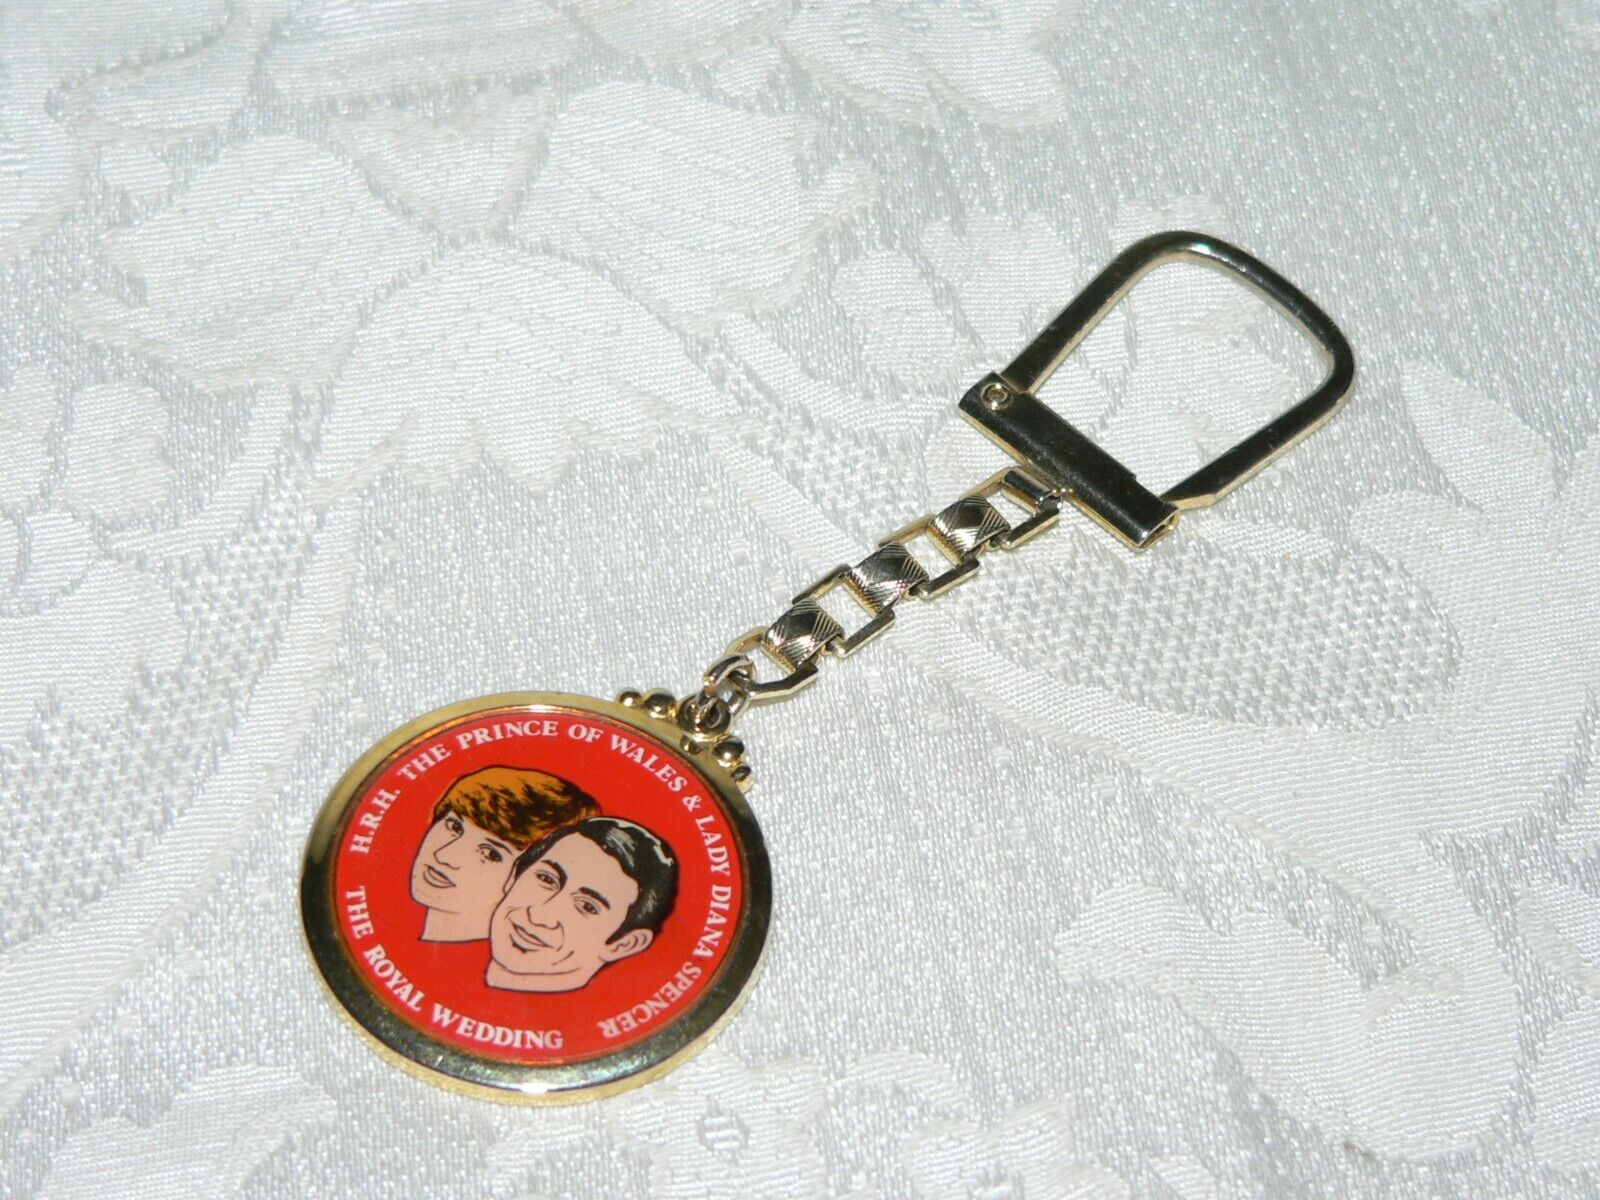 Prince of Wales and Lady Diana Spencer - Keychain - July 29th 1981-Royal Wedding